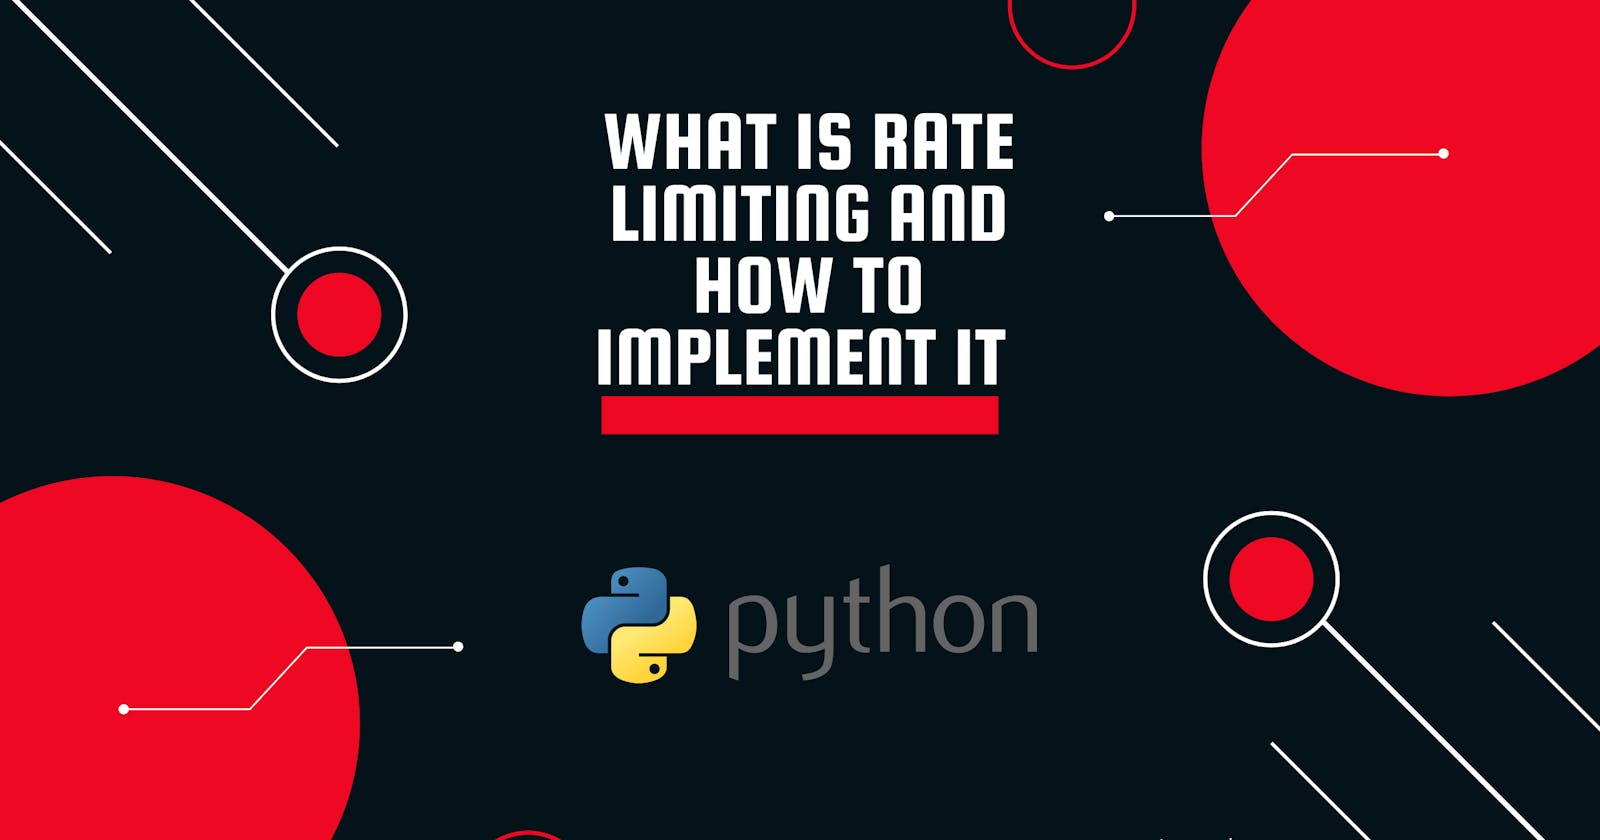 What is rate-limiting and how to implement it in a python application?